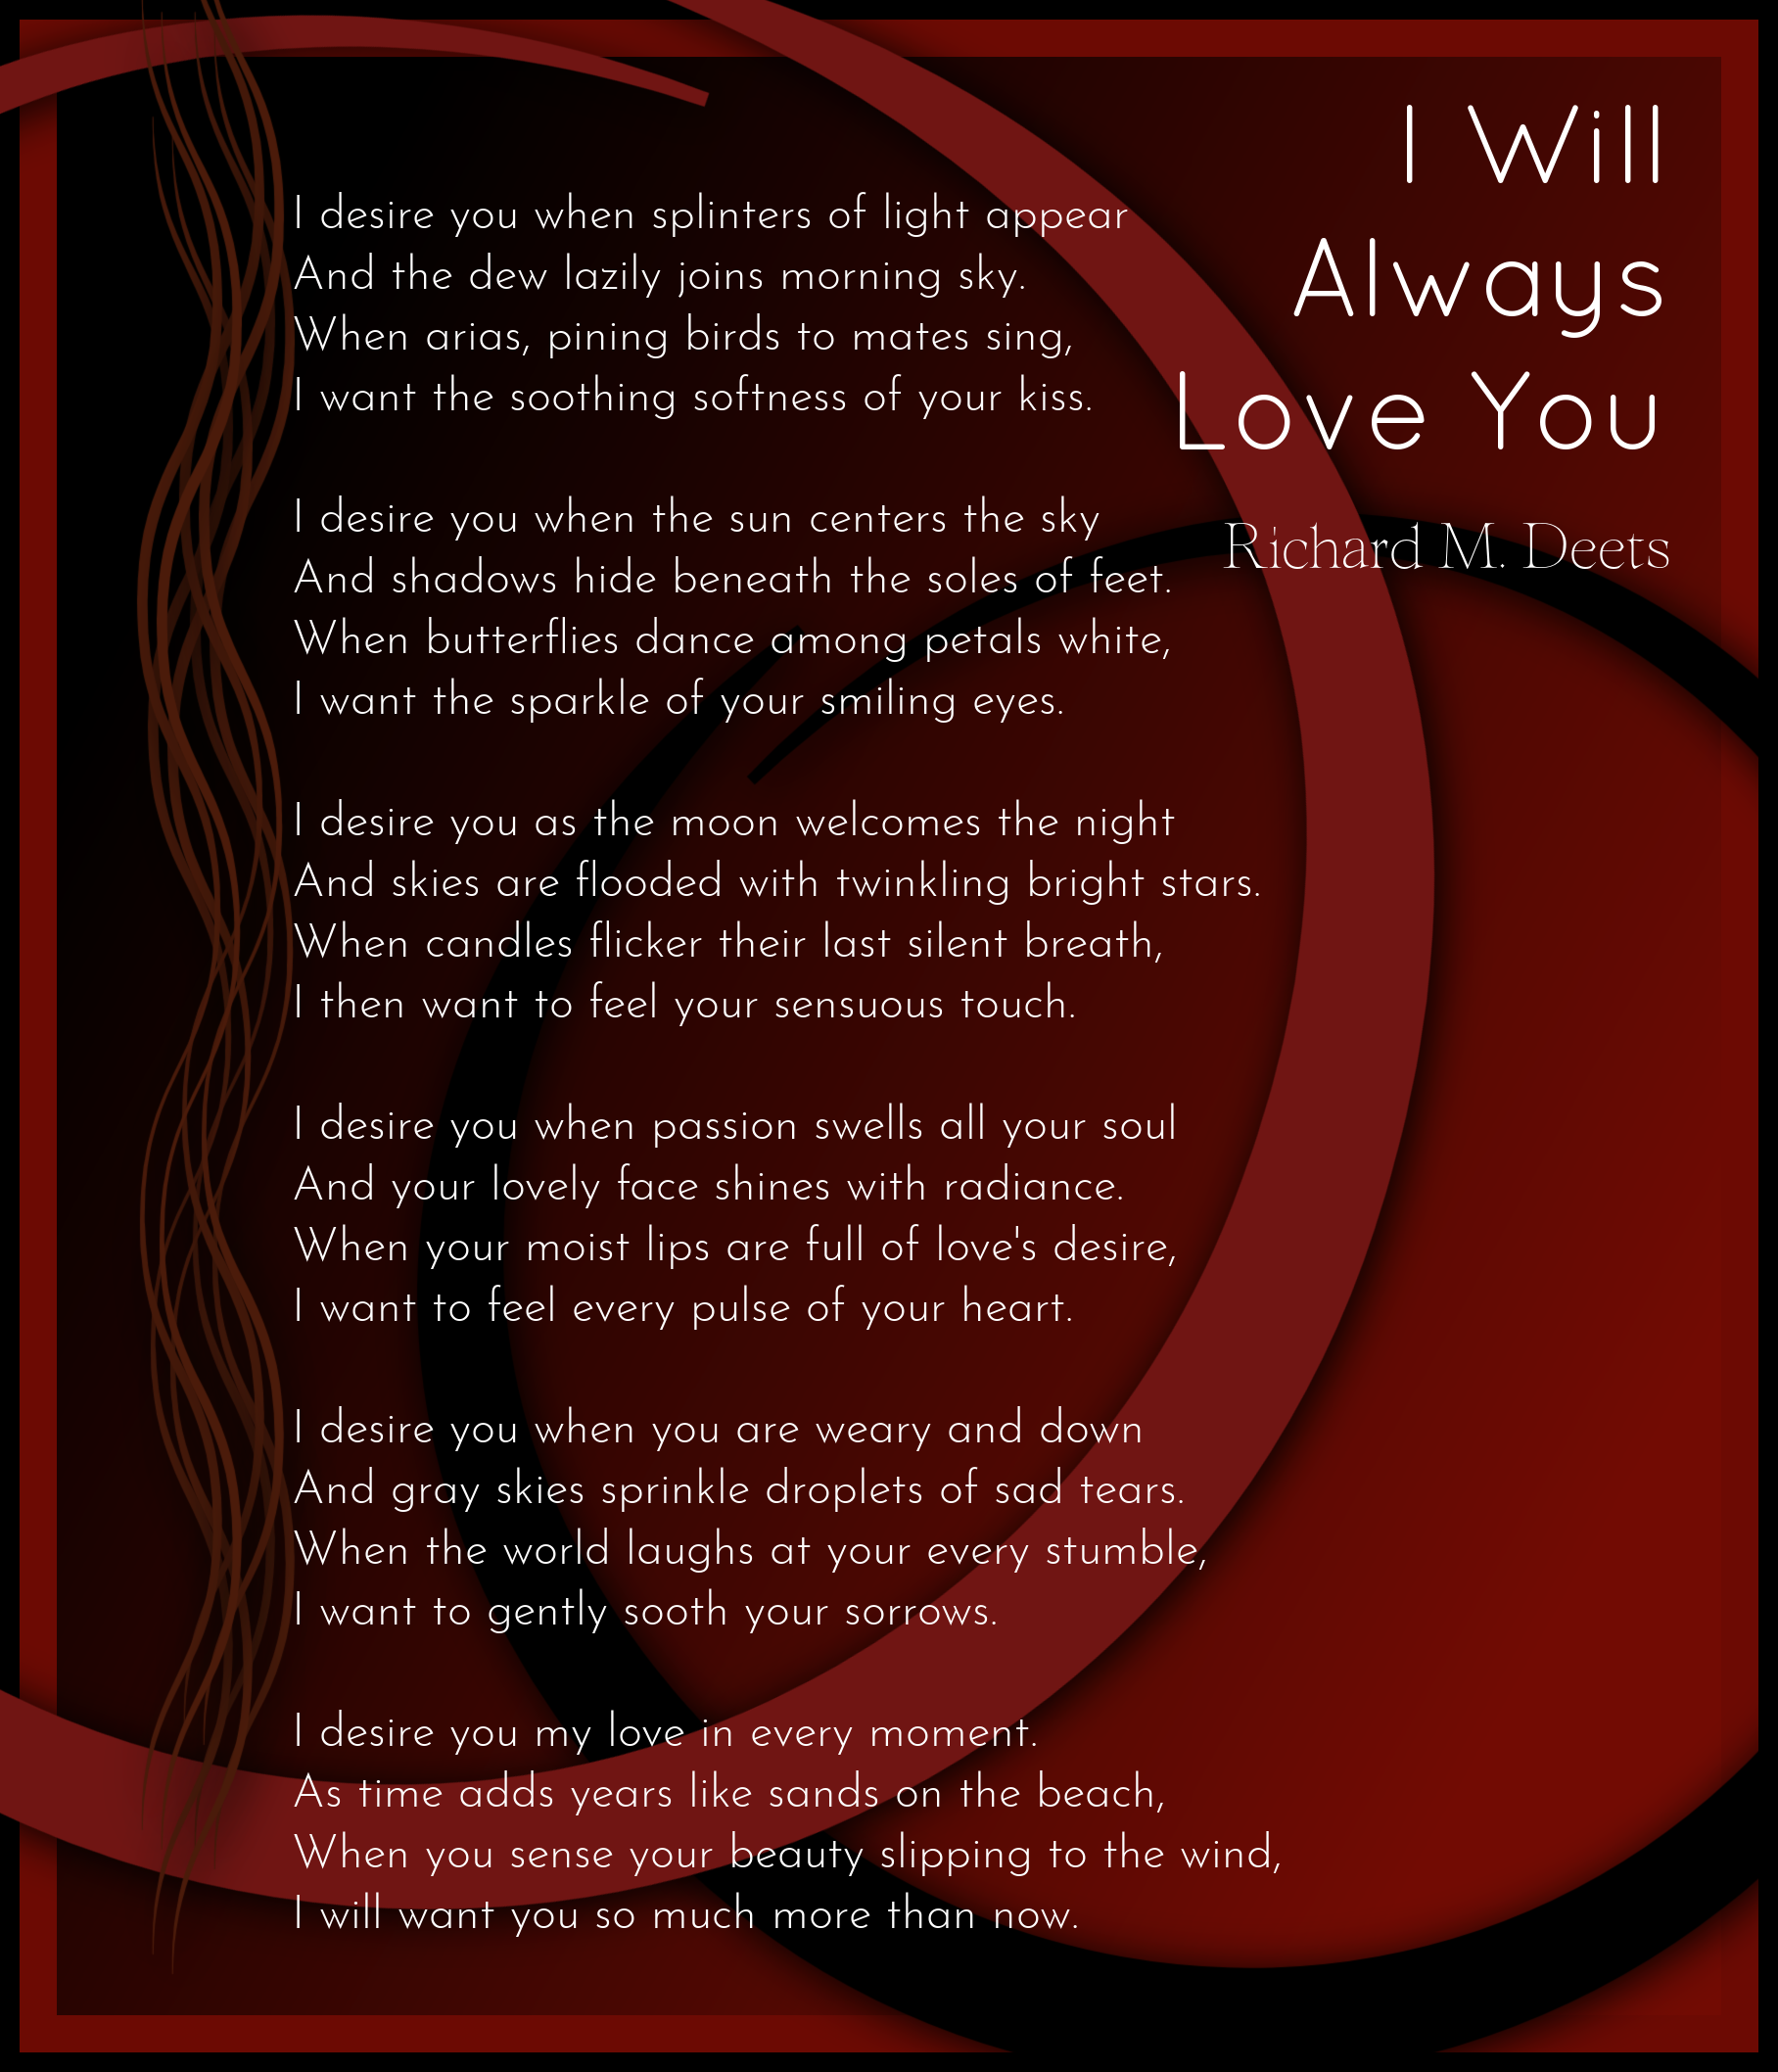 I Will Always Love You-Richard M. Deets | Love Poems